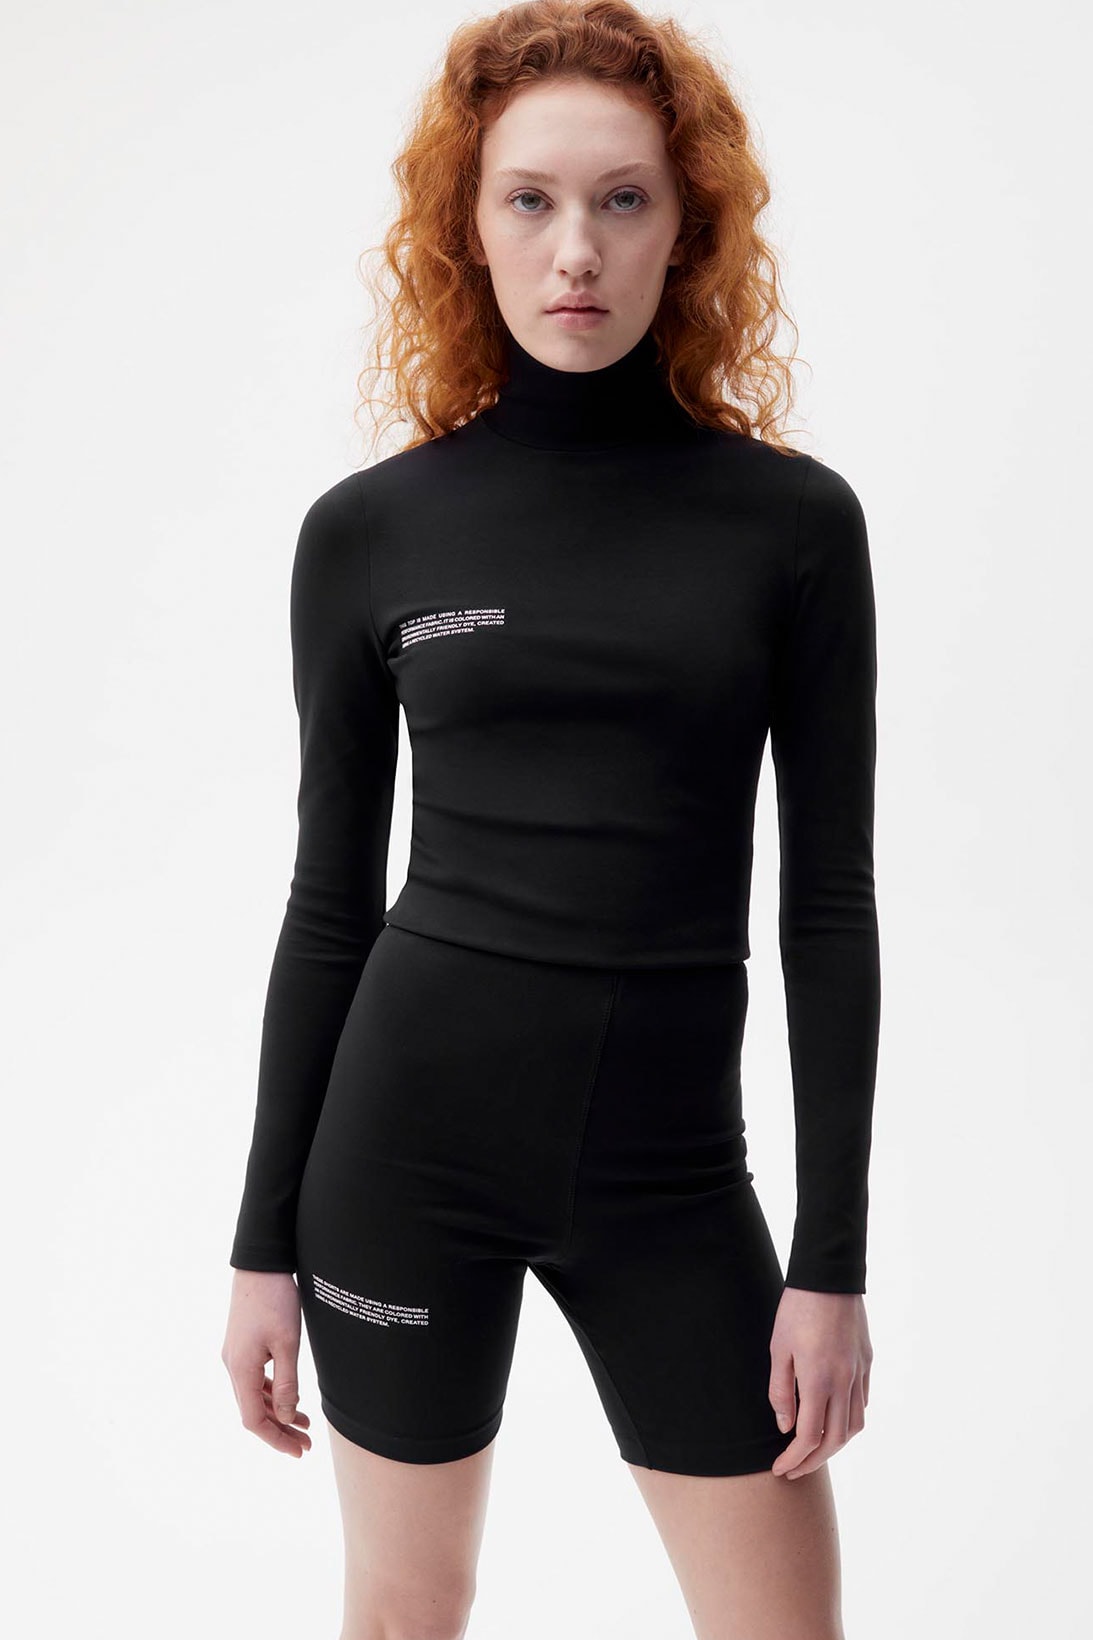 pangaia roica stretch athleisure sustainable collection turtleneck top bike shorts black